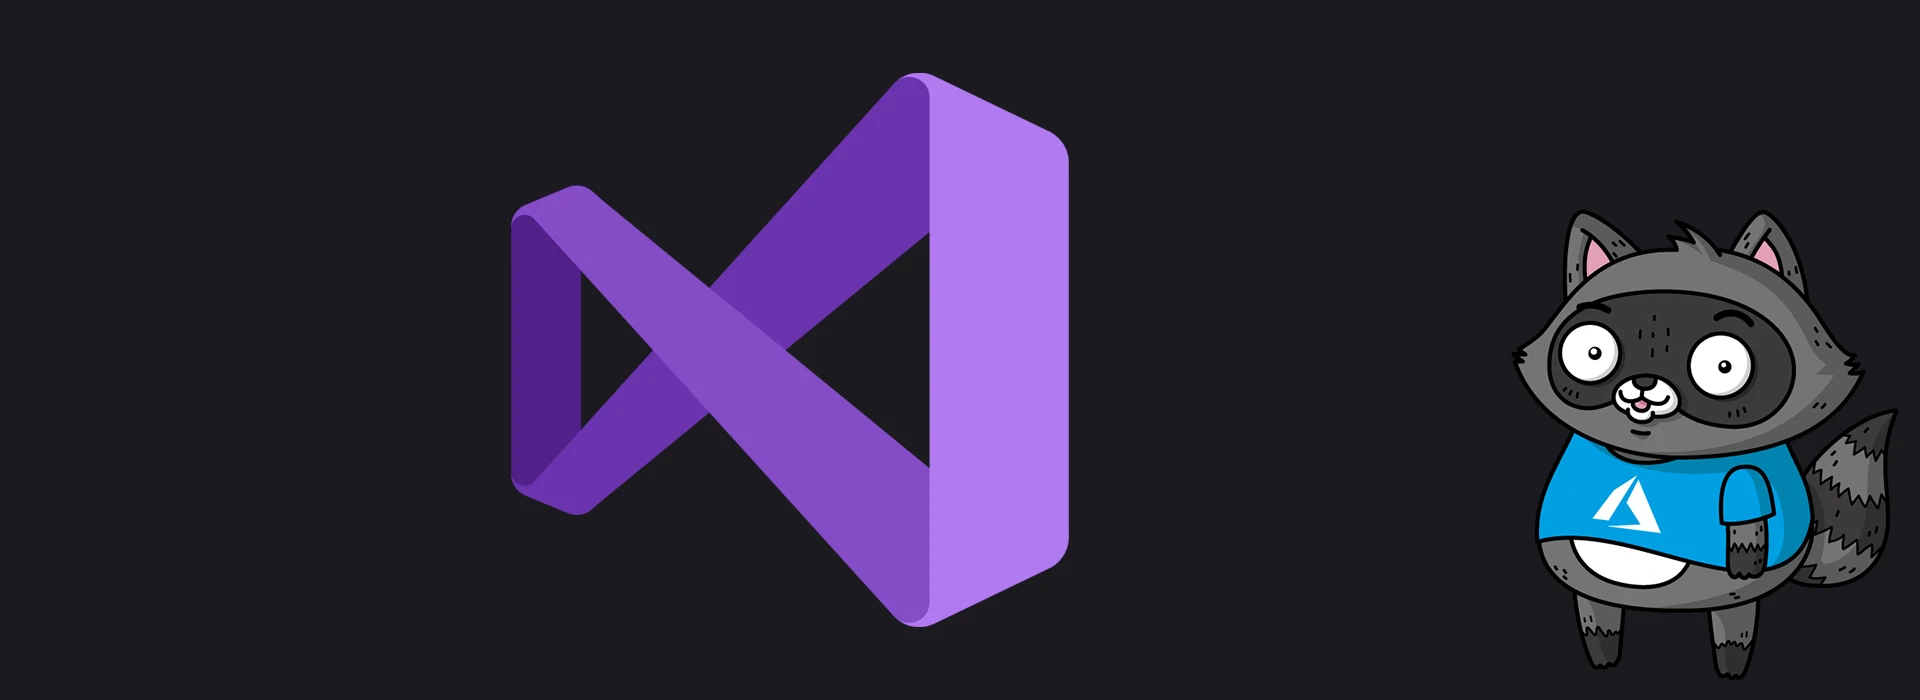 Join us November 8th for the launch of Visual Studio 2022! - Microsoft  Industry Blogs - United Kingdom